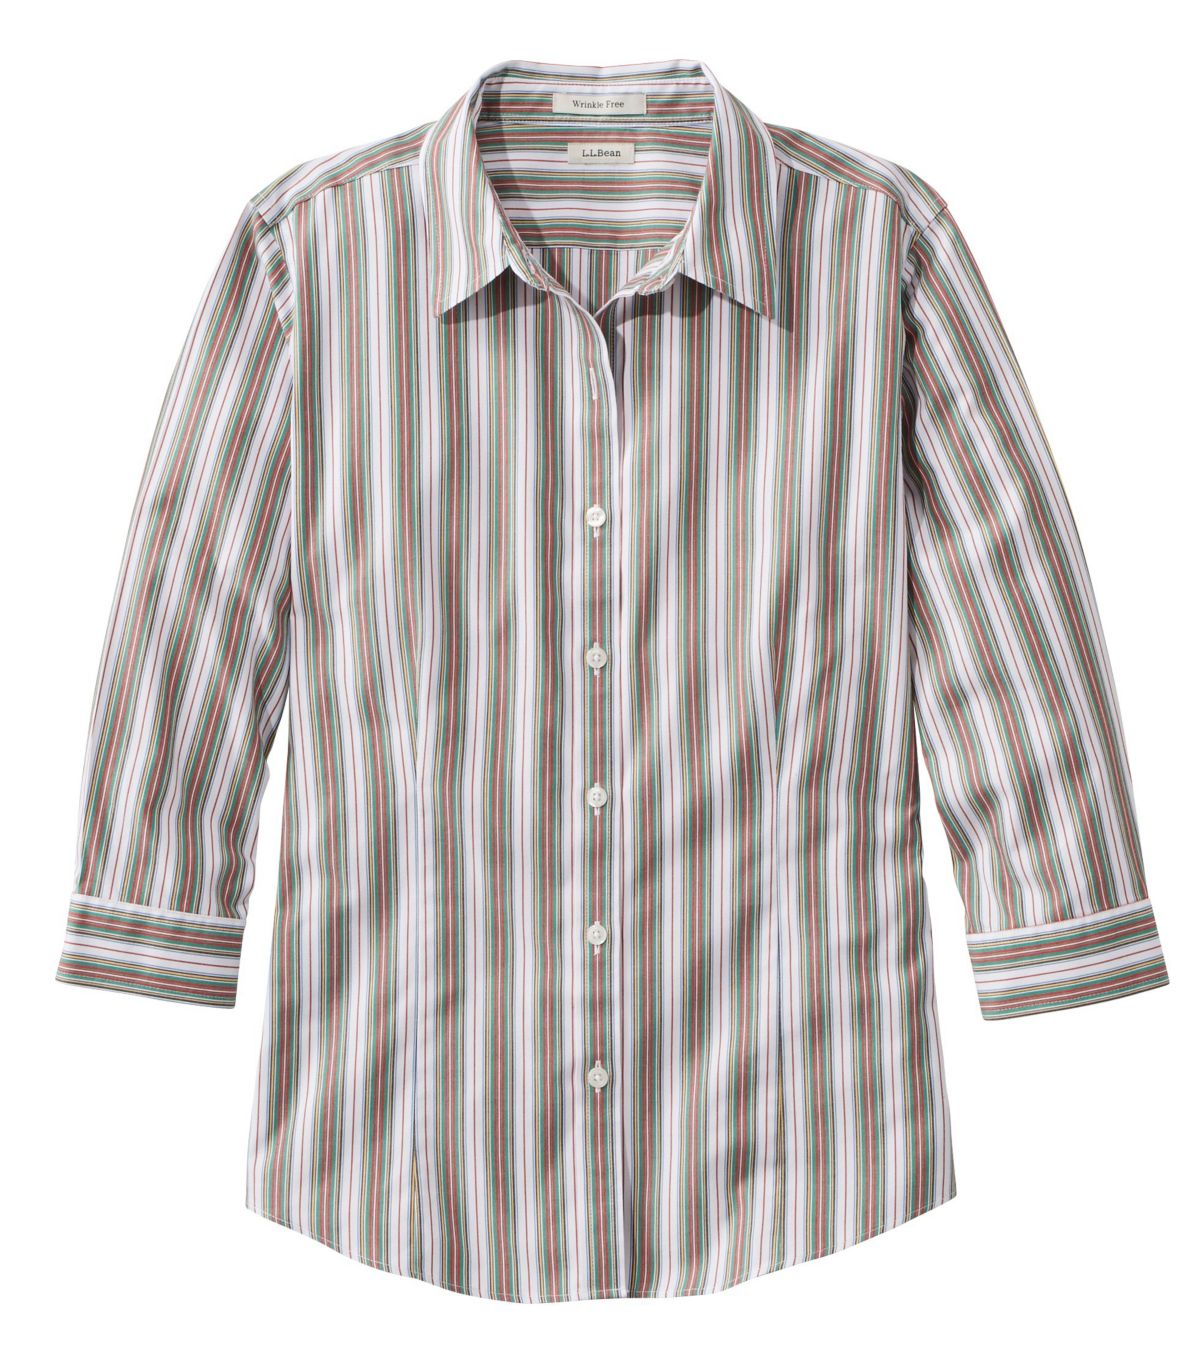 Women's Wrinkle-Free Pinpoint Oxford Shirt, Three-Quarter Sleeve Slightly Fitted Stripe